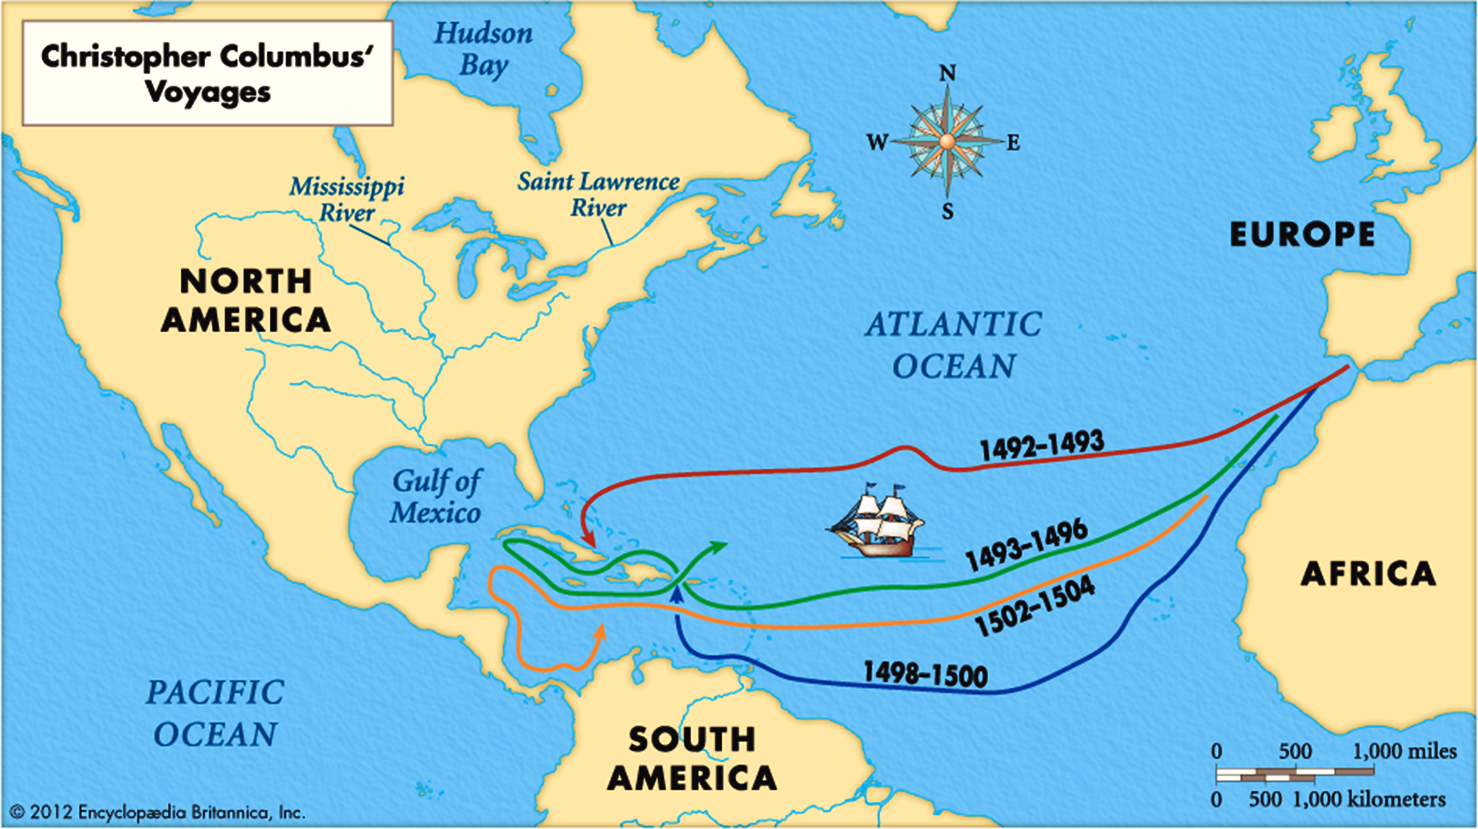 On October 12, 1492 Columbus first made landfall in the Bahamas.